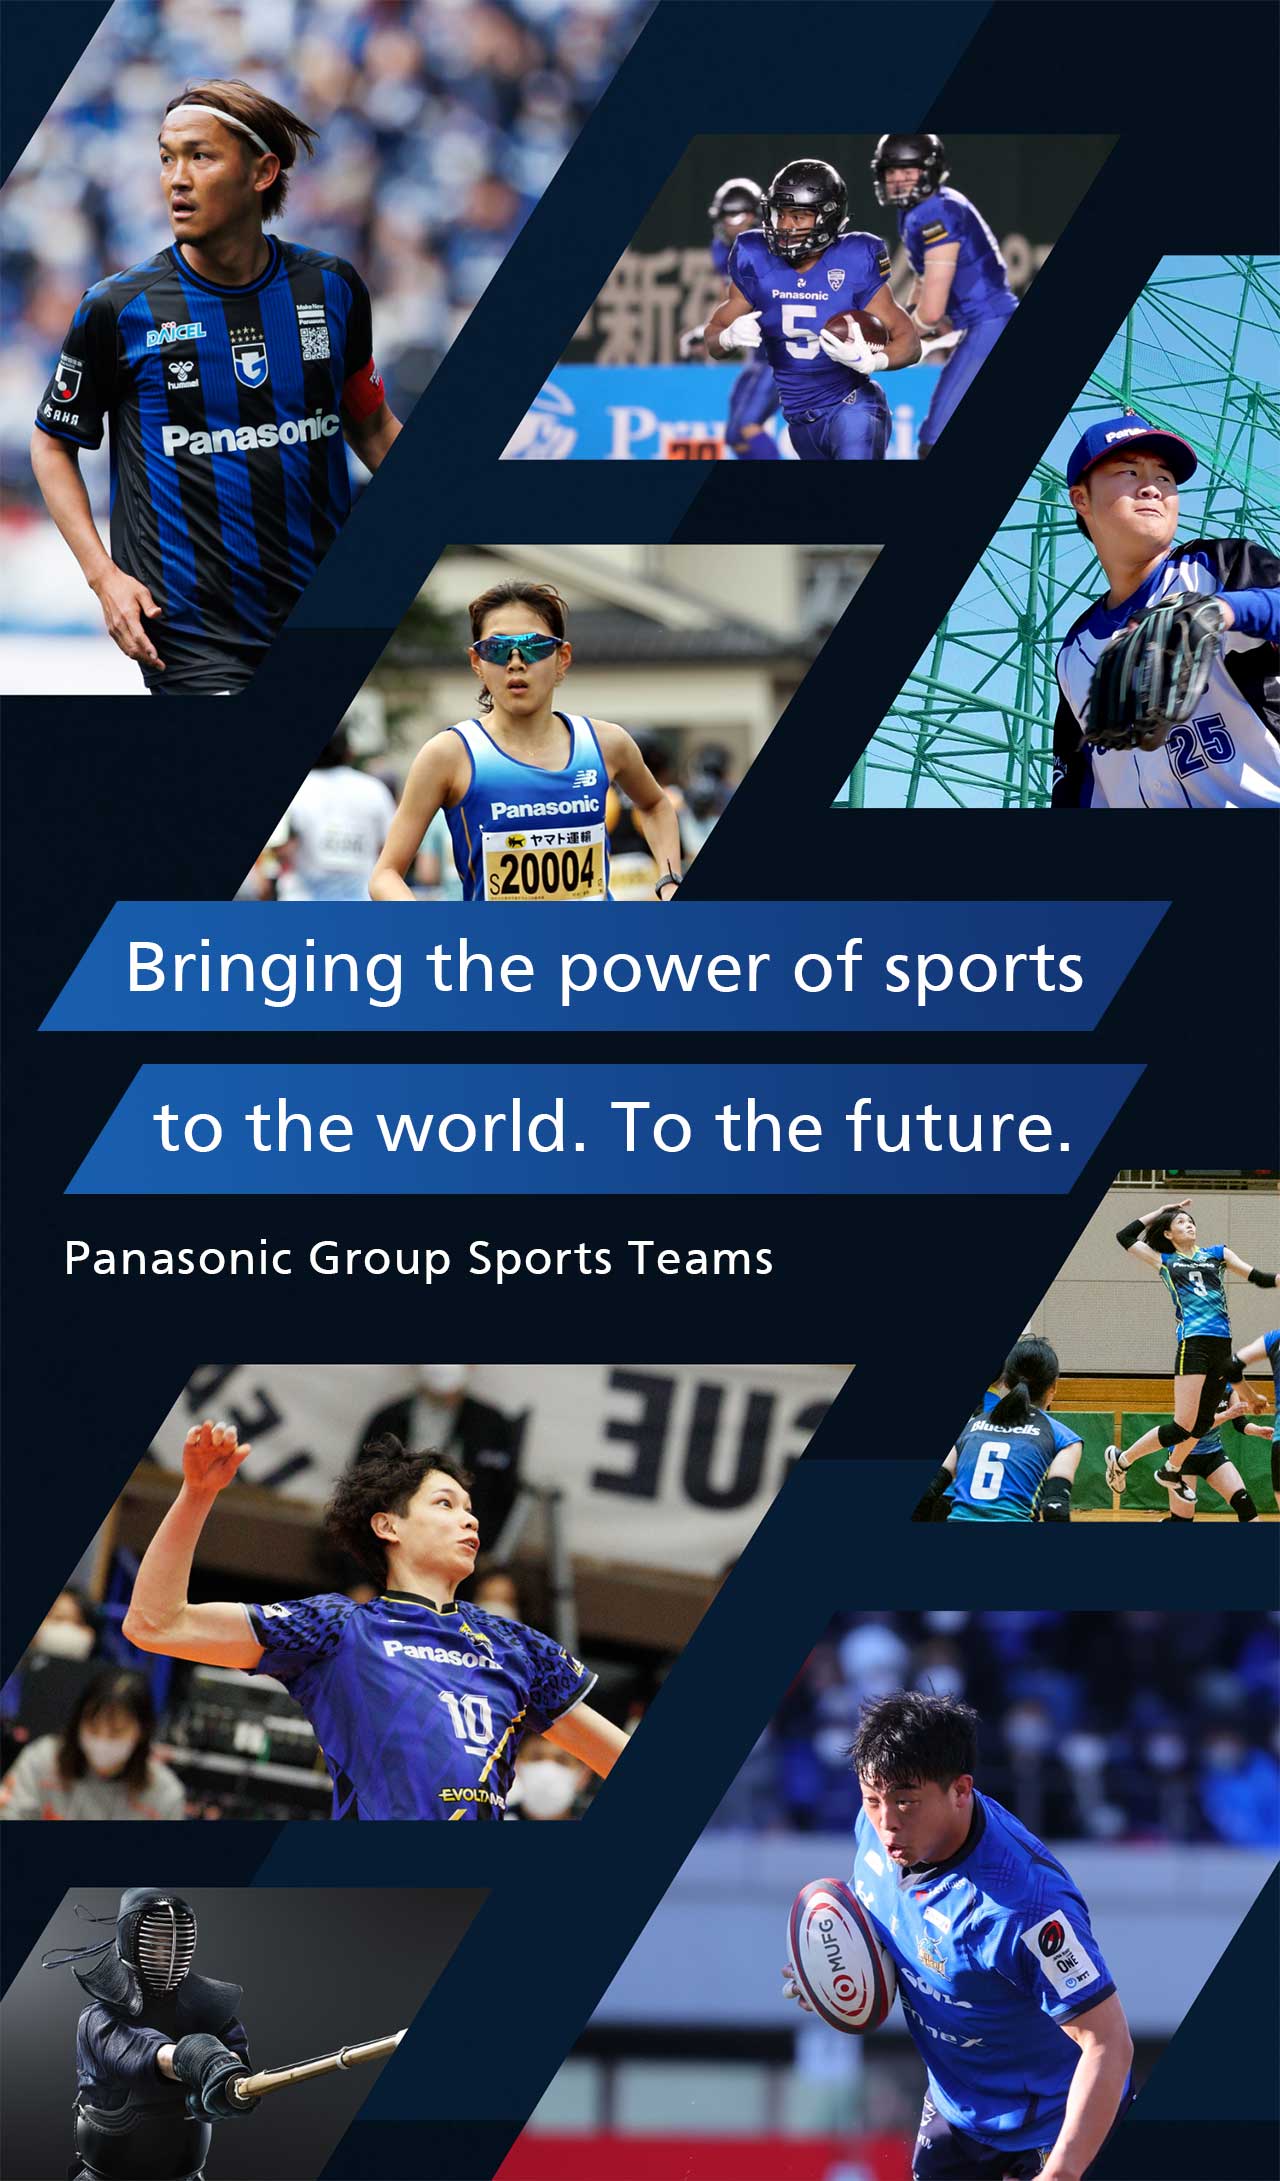 Bringing the power of sports to the world. To the future. Panasonic Group Sports Teams